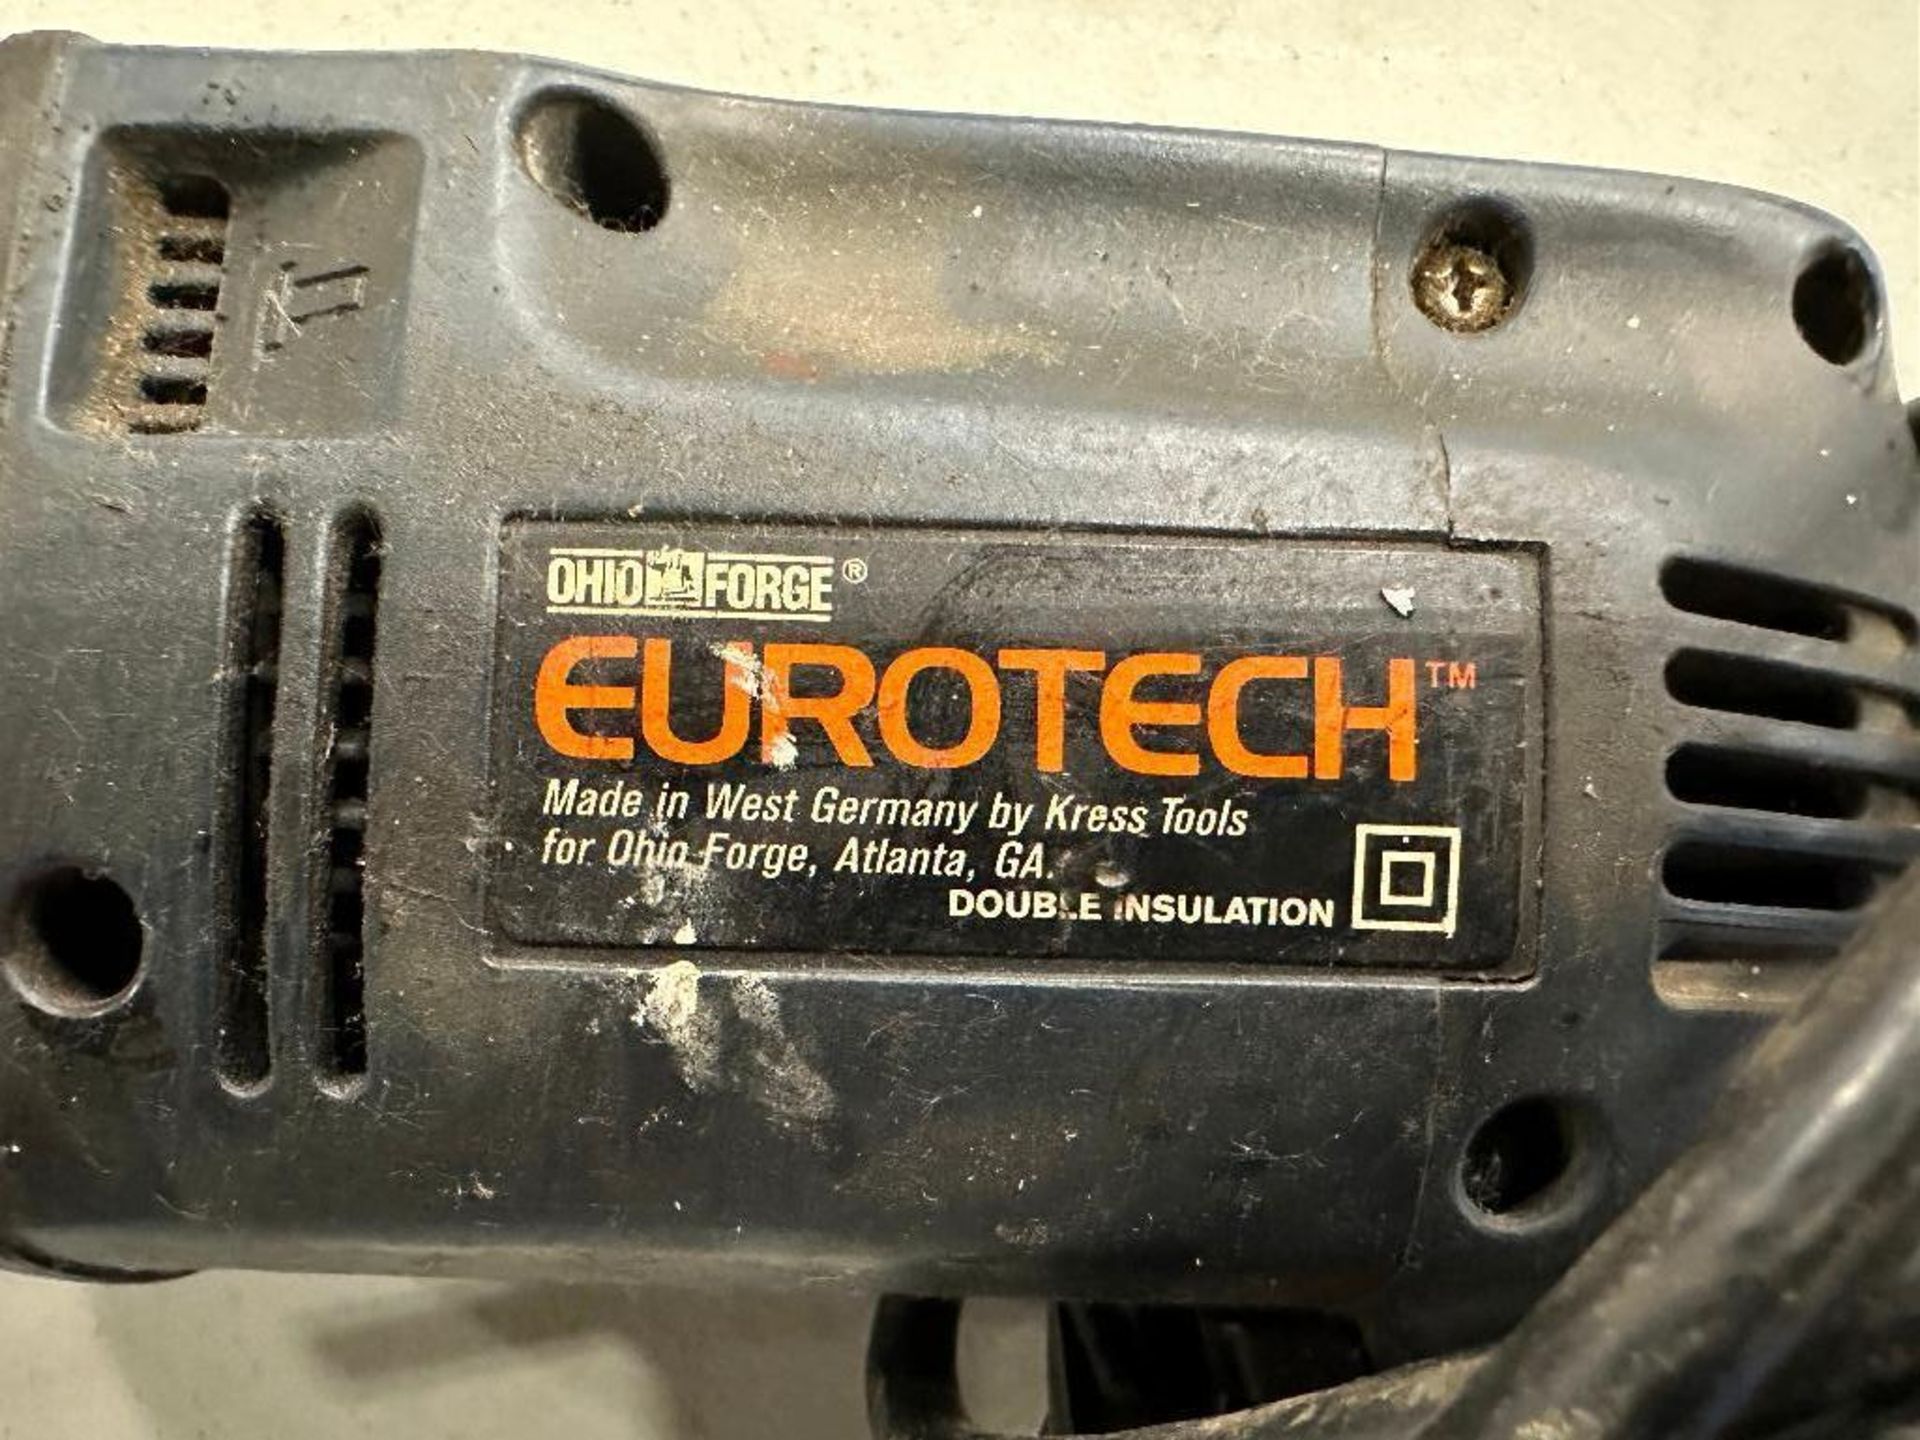 Eurotech 505-676 Electric Drill - Image 3 of 3